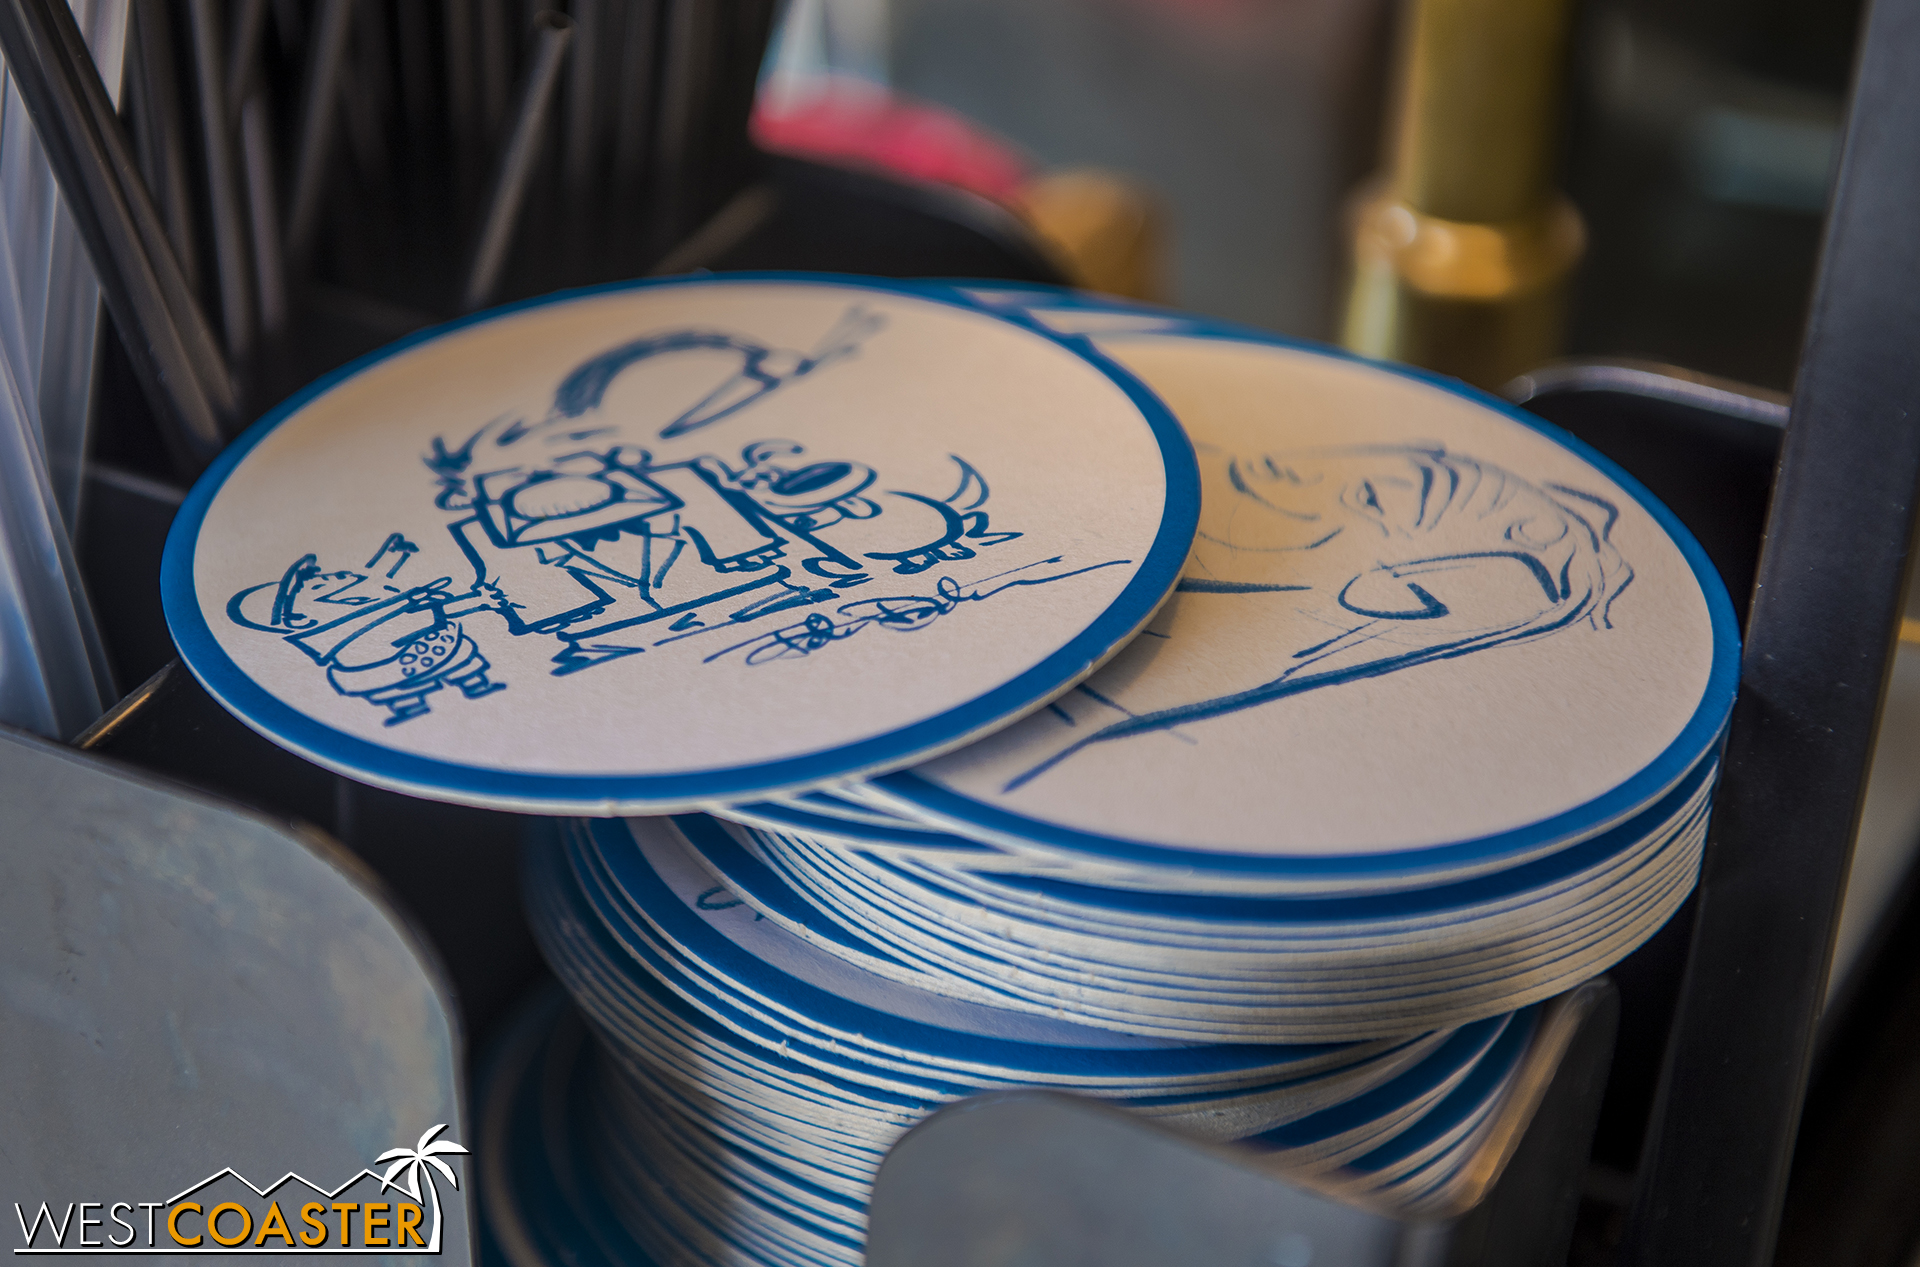  The coasters have dozens of designs on them.  A cool little thing Disney made! 